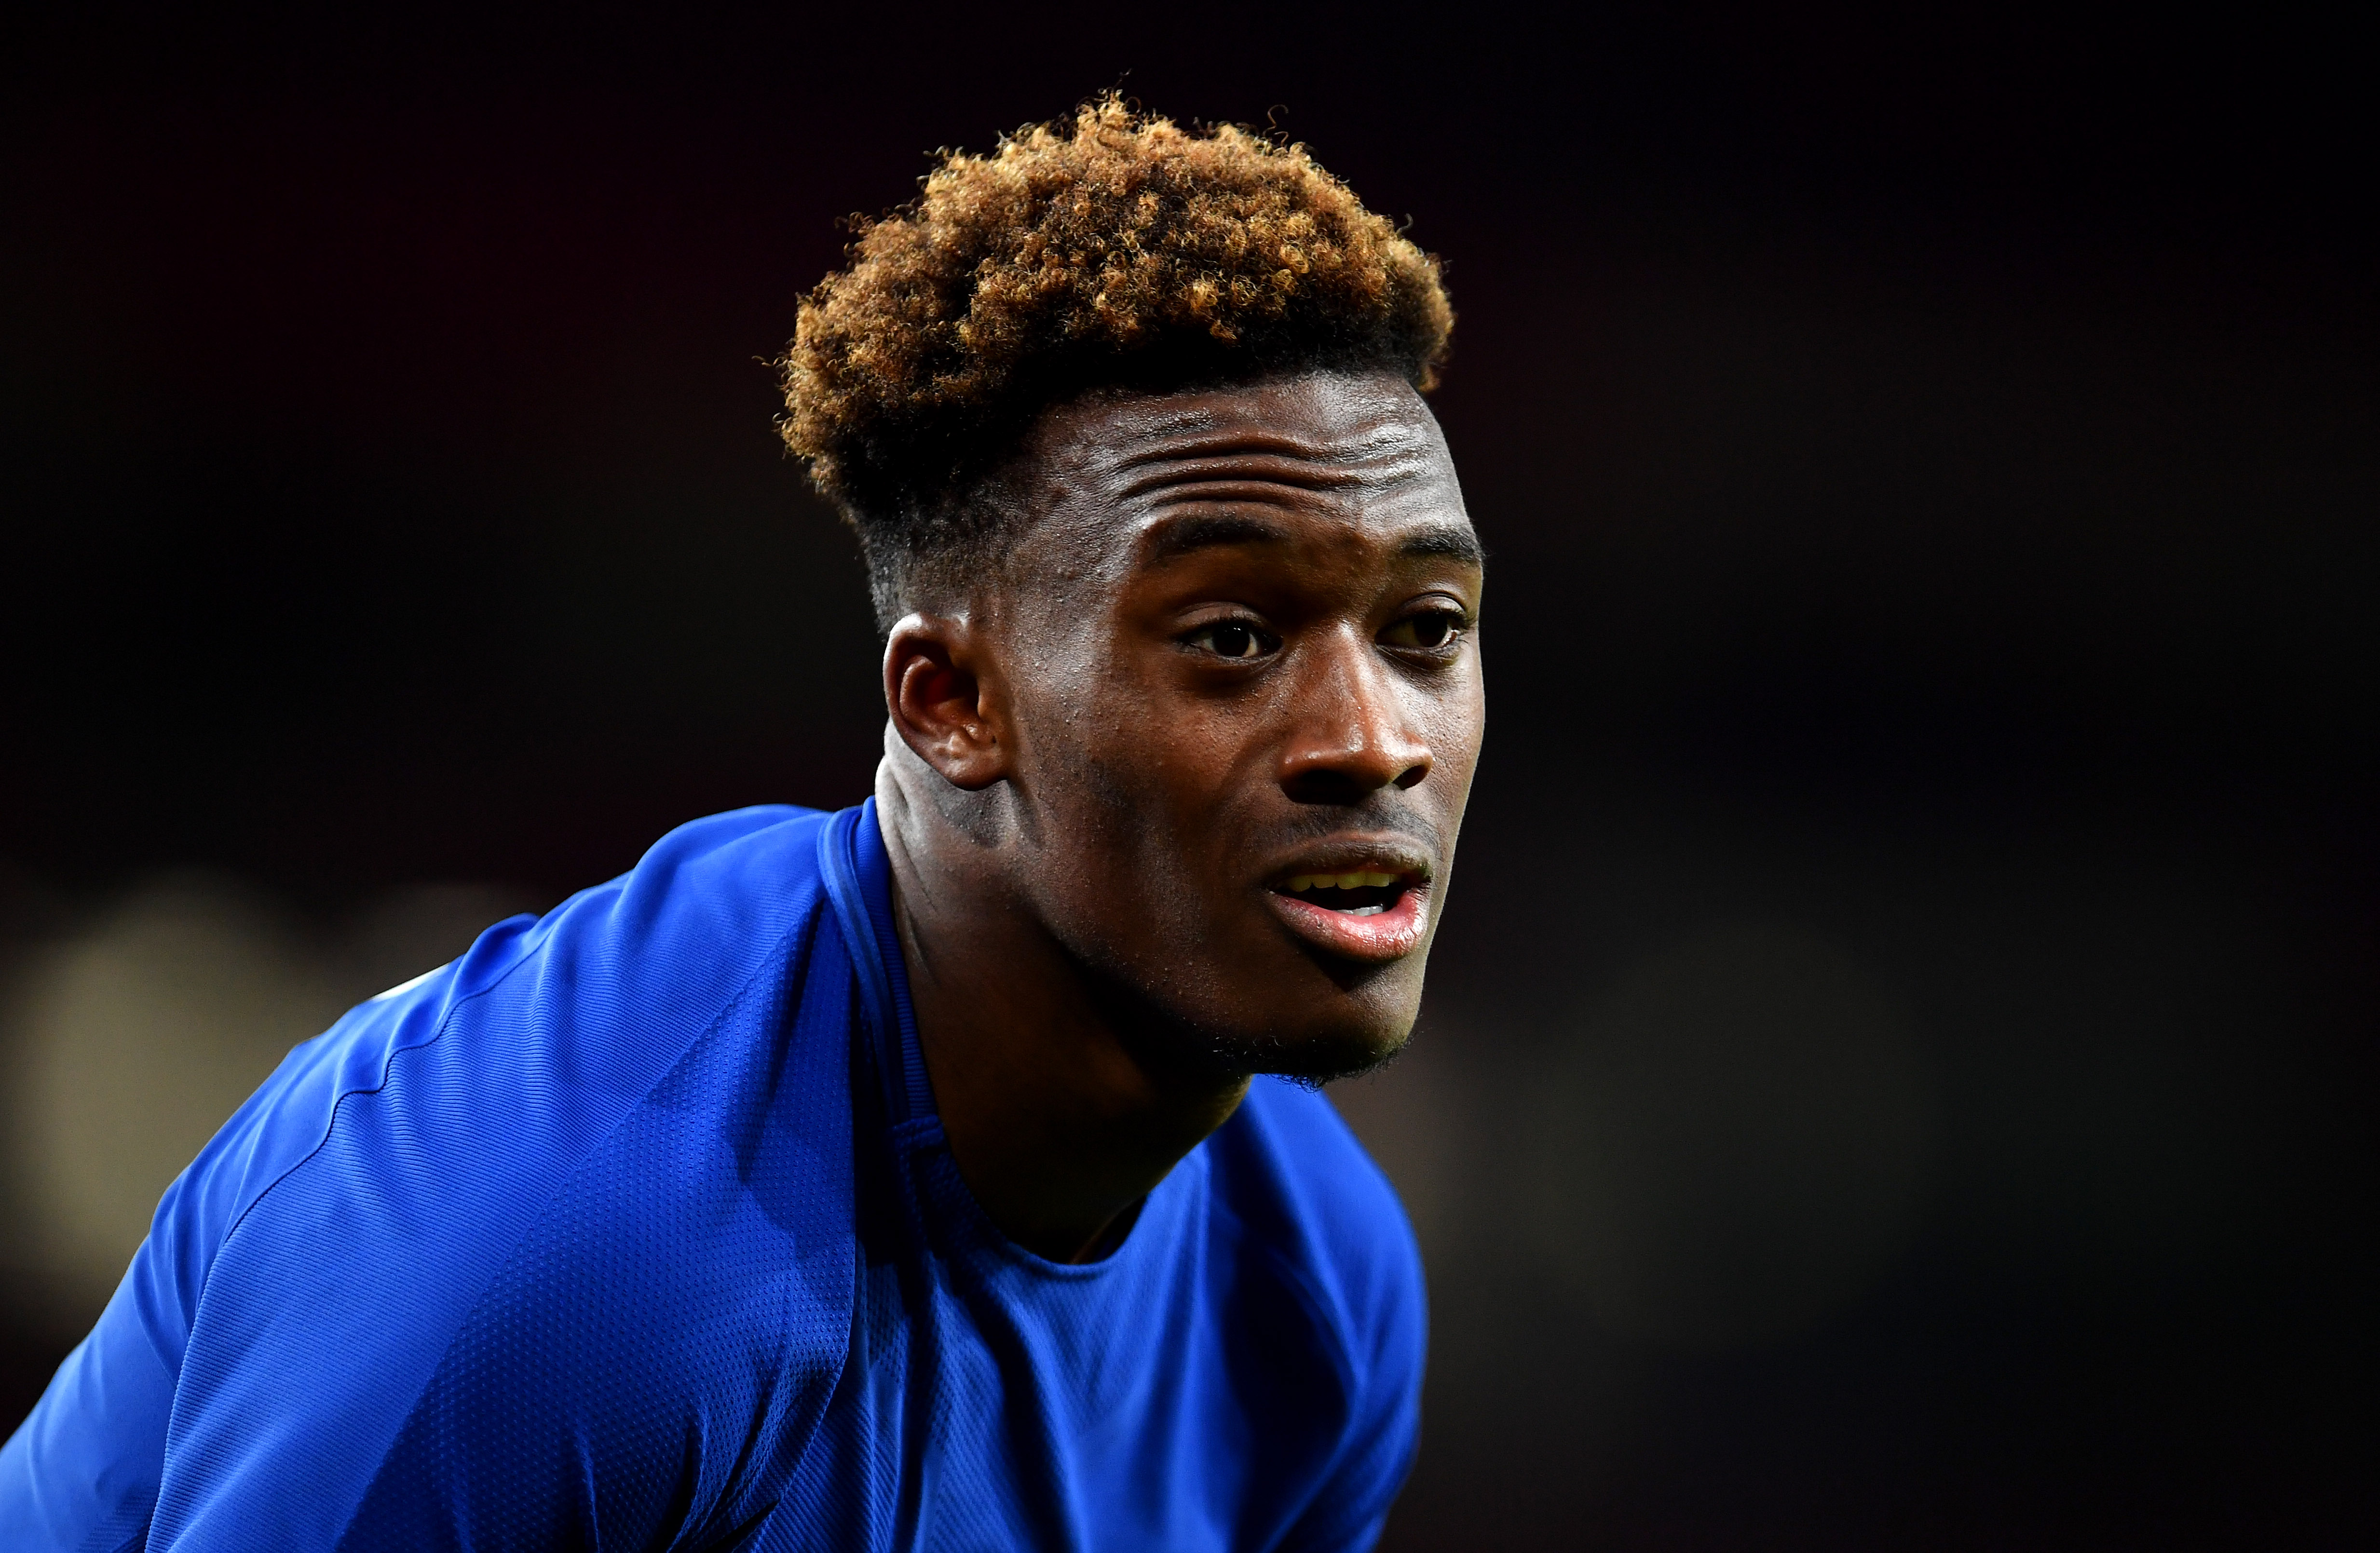 LONDON, ENGLAND - APRIL 30: Callum Hudson-Odoi of Chelsea during the FA Youth Cup Final: Second Leg between Chelsea and Arsenal at Emirates Stadium on April 30, 2018 in London, England. (Photo by Justin Setterfield/Getty Images)